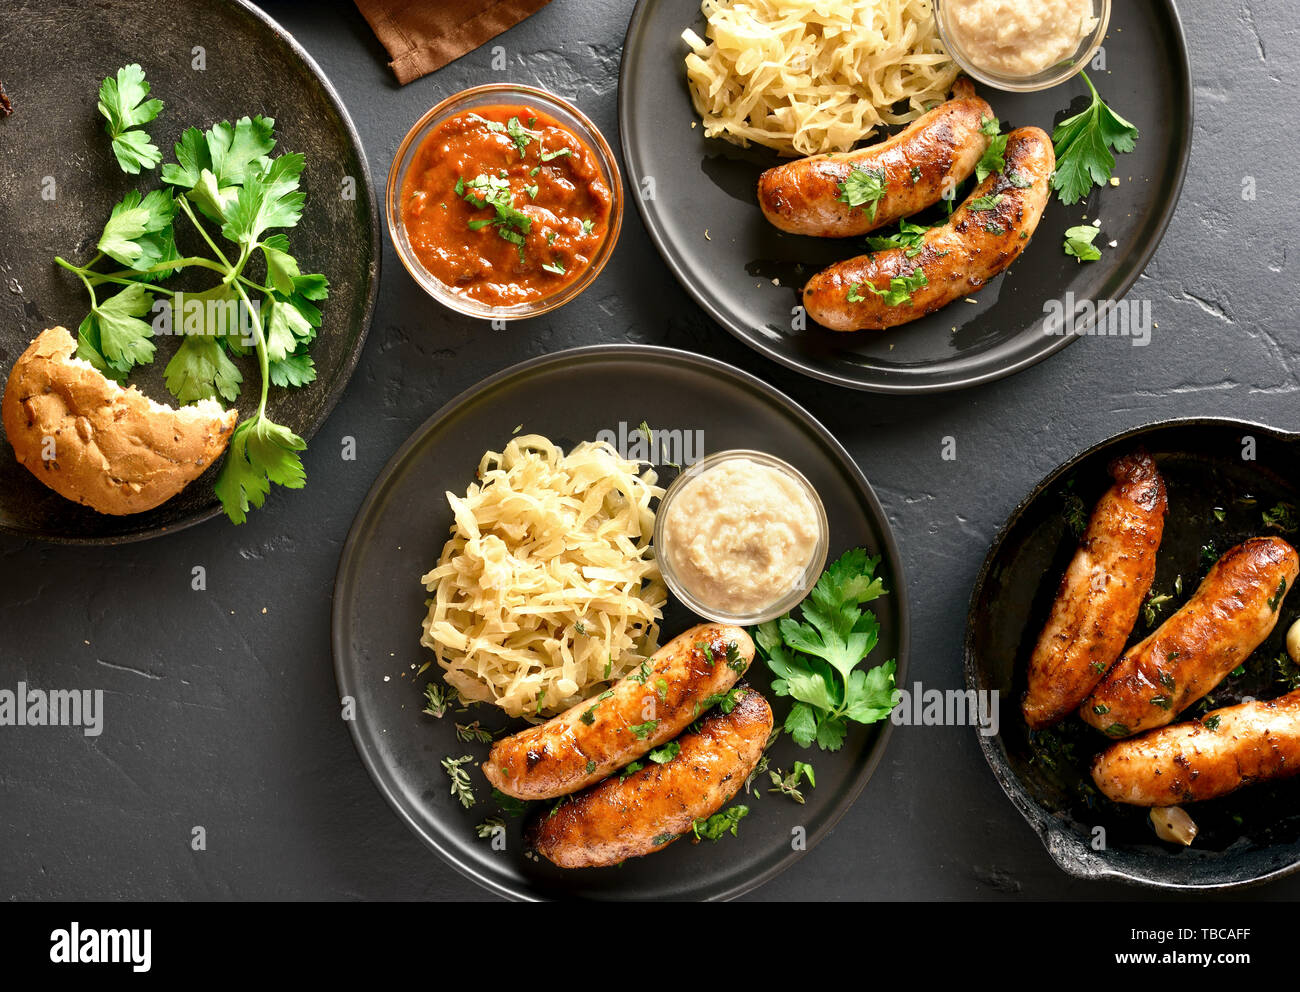 Grilled sausages with stewed sauerkraut and horseradish on plate over black stone background. Top view, flat lay Stock Photo